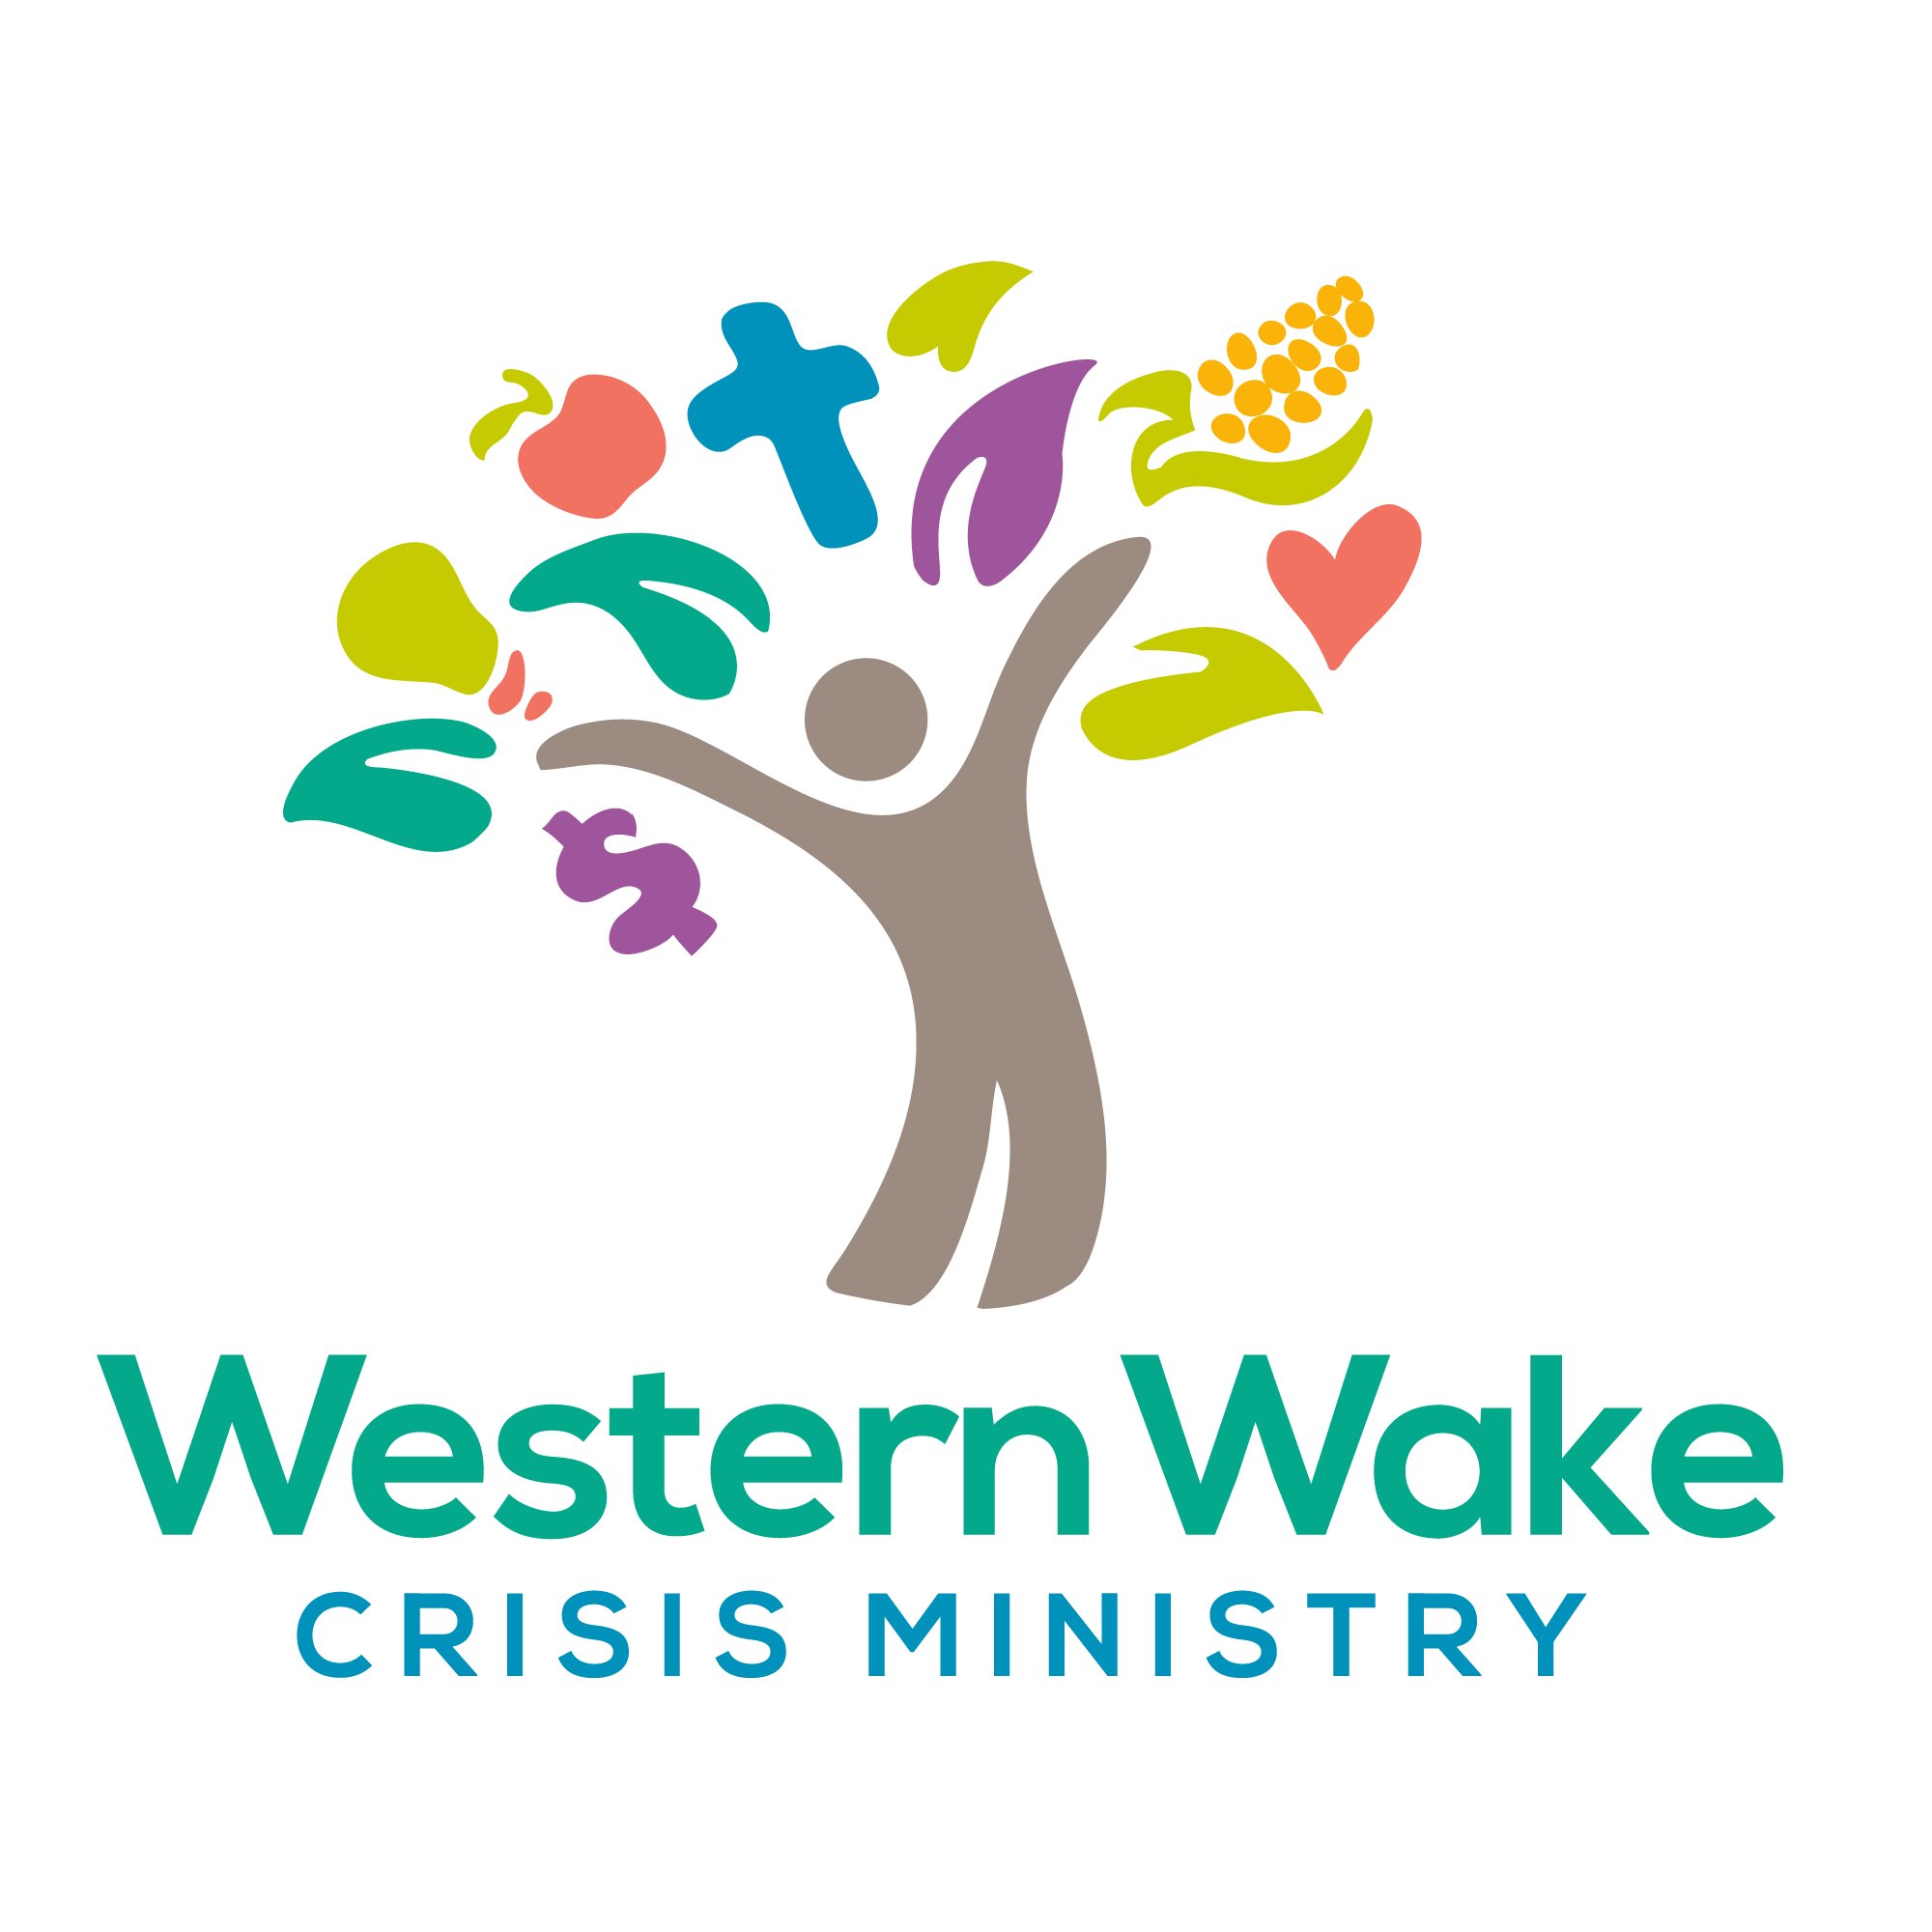 Providing food pantry & emergency financial assistance to our neighbors in need in western Wake County since 1983